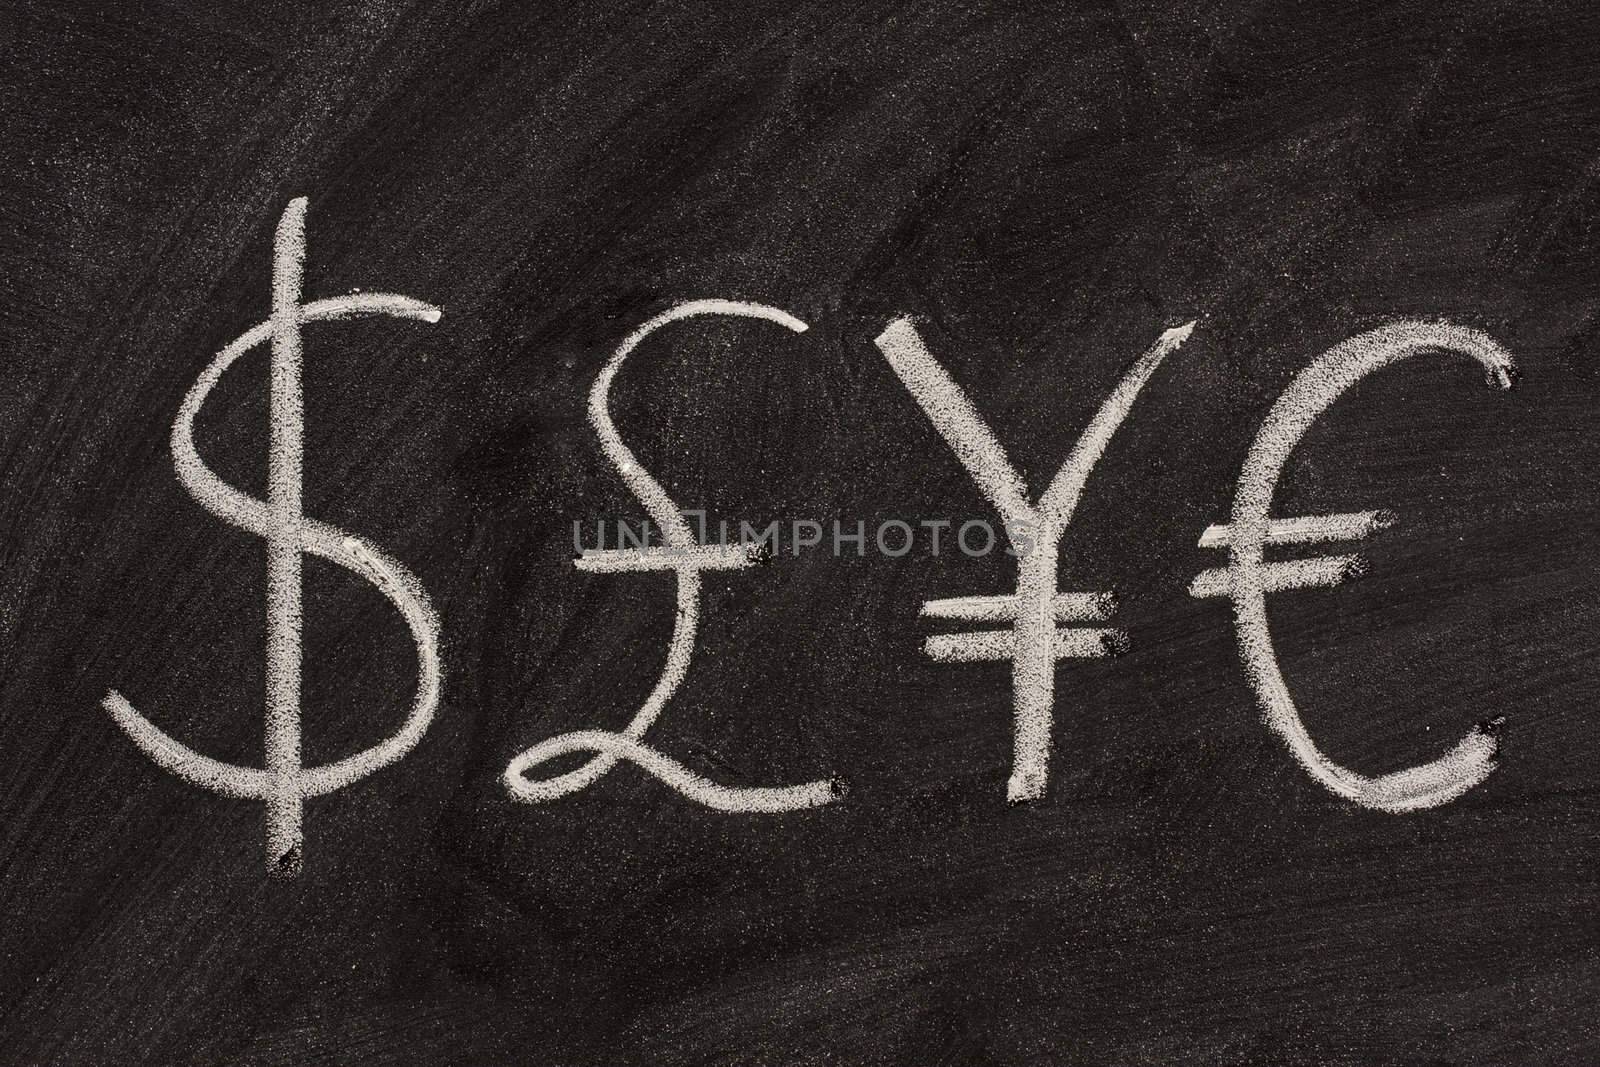 dollar, pound, yen and euro symbols sketched with white chalk on a black board